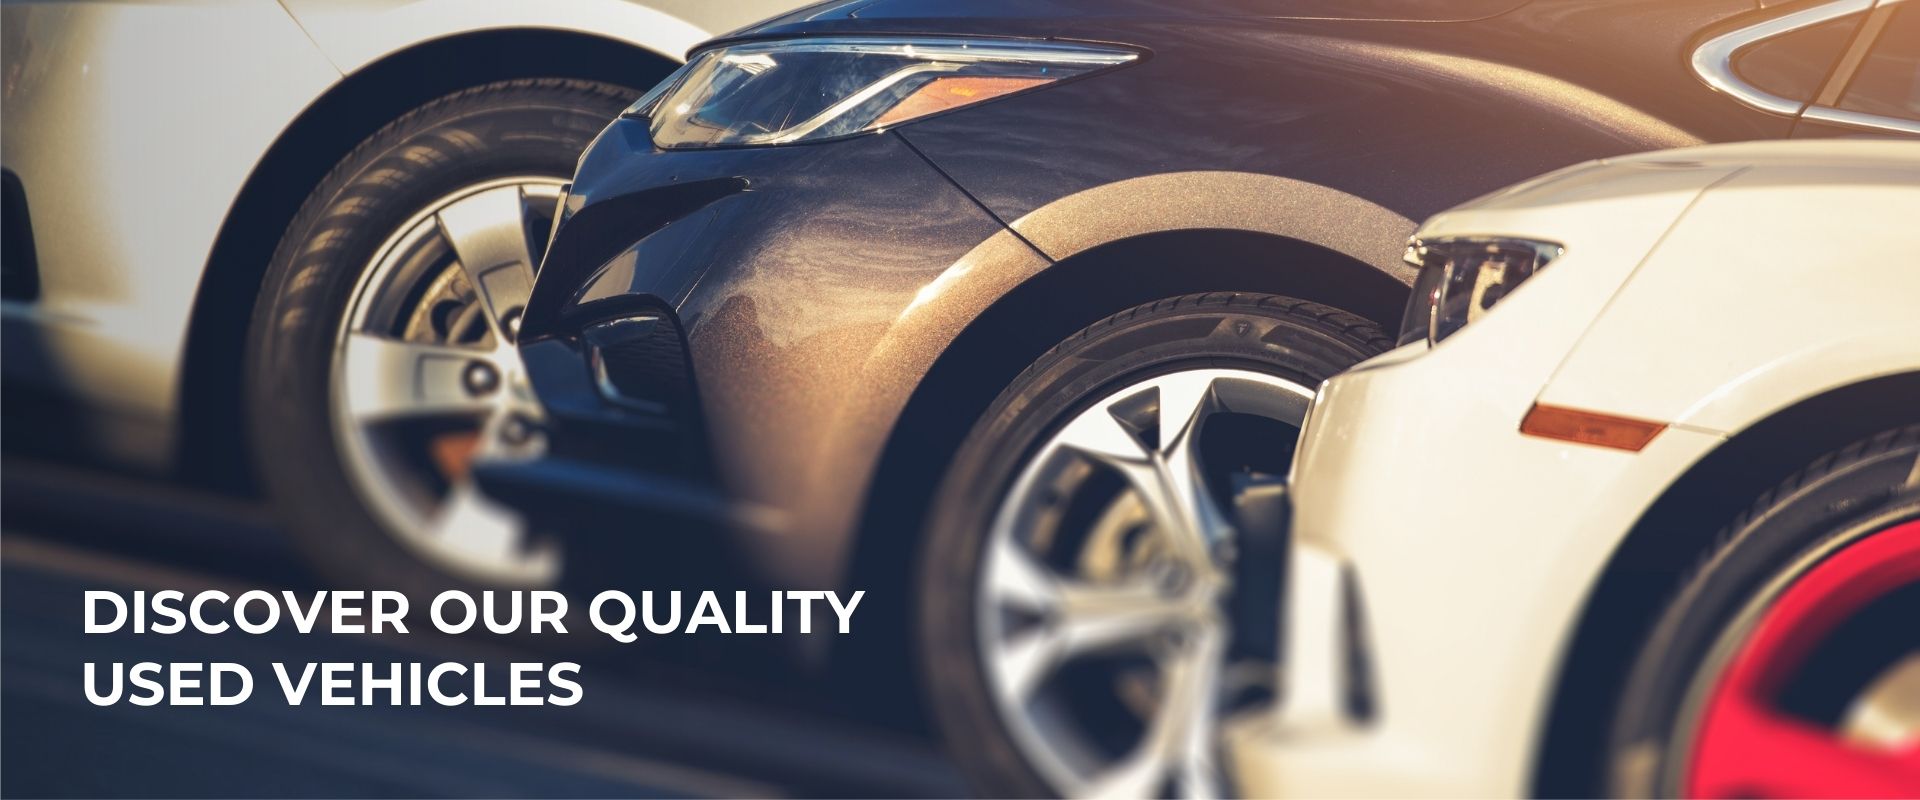 Discover our quality used vehicles